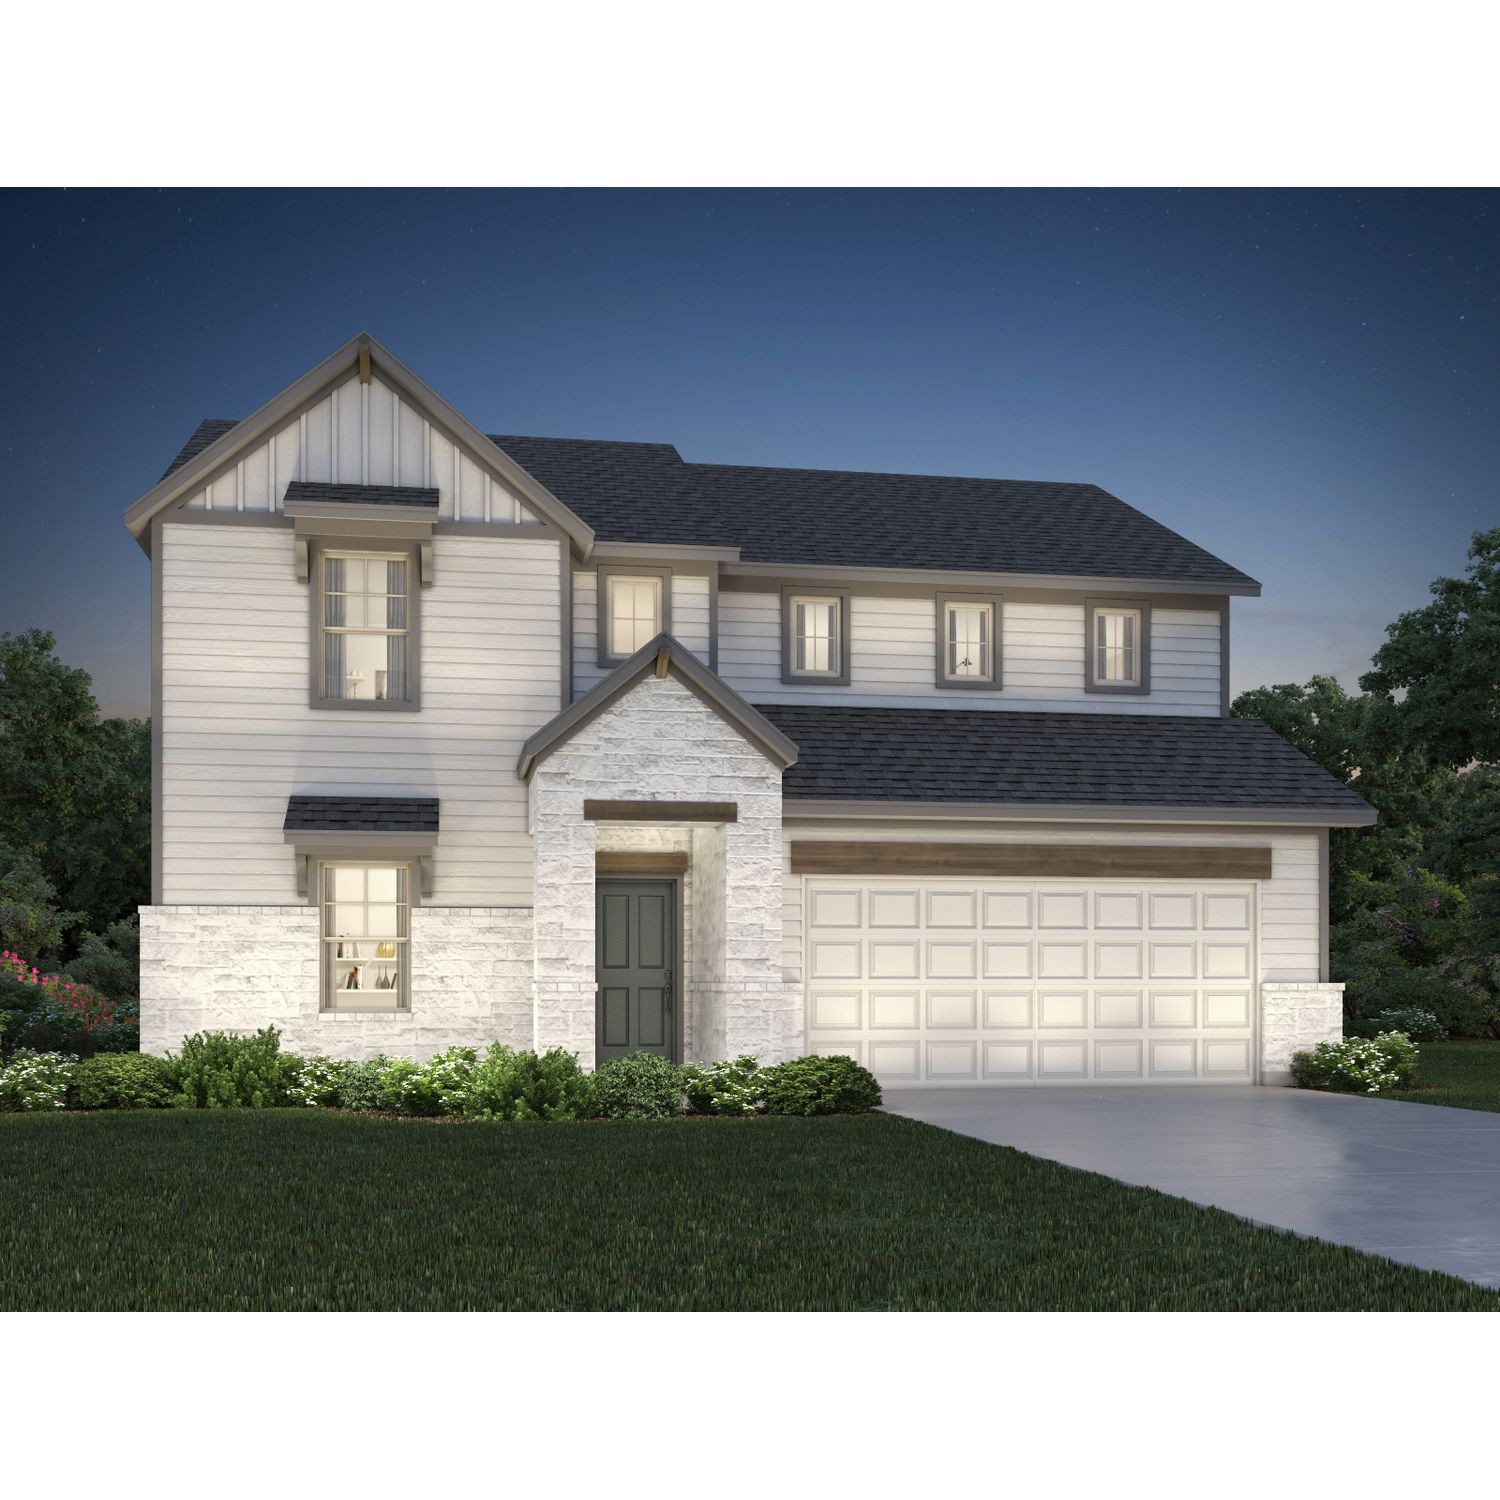 11. Riverbend At Double Eagle - Boulevard Collection